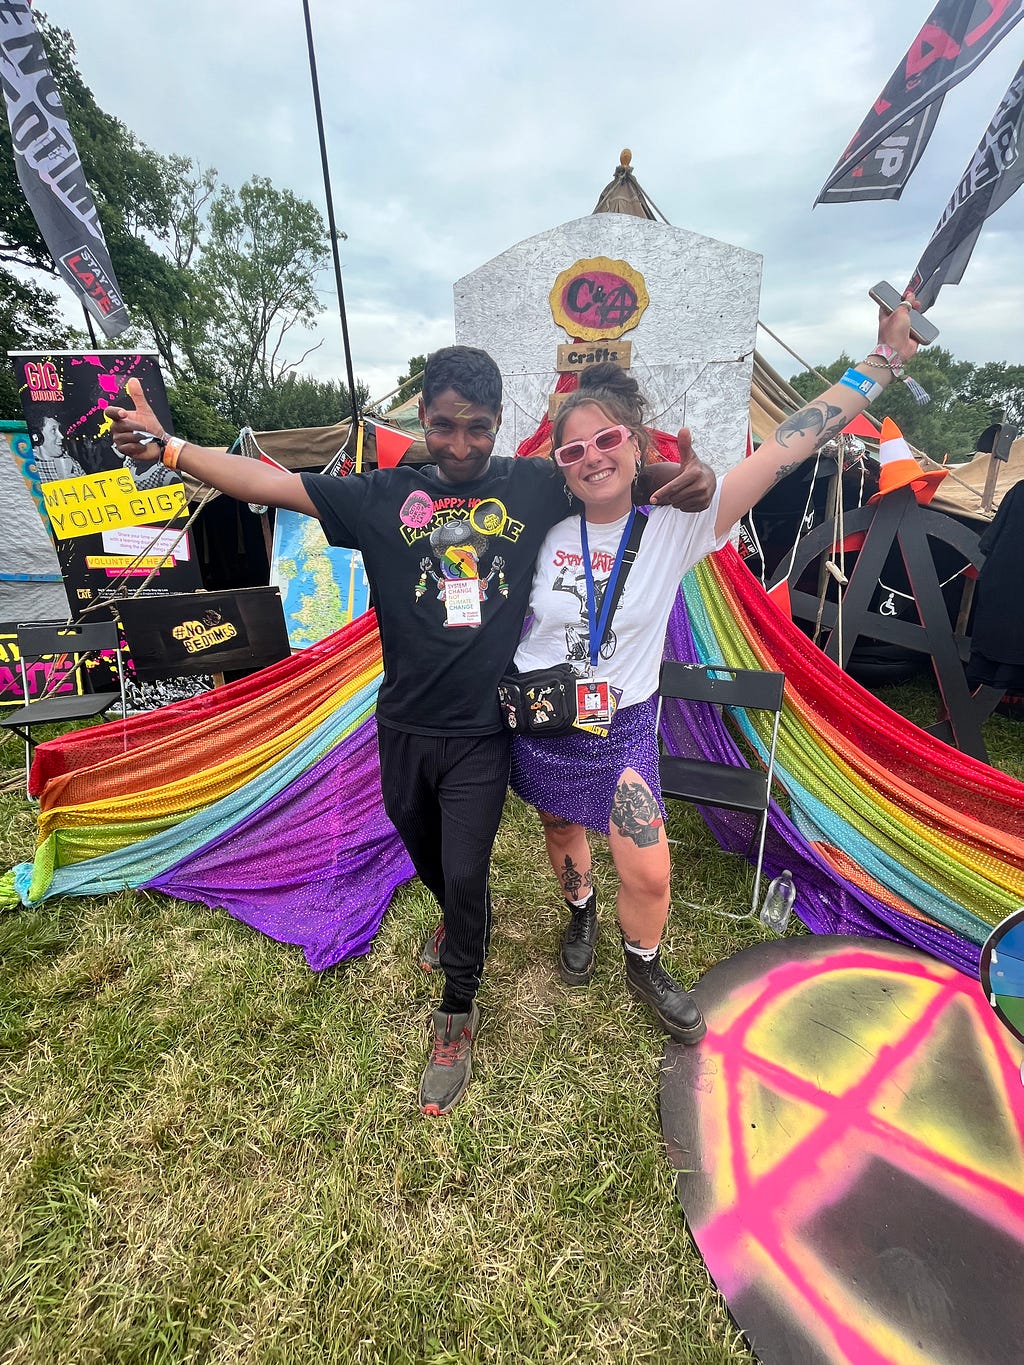 Two Gig Buddies embracing with their arms in the air outside a colourful tent